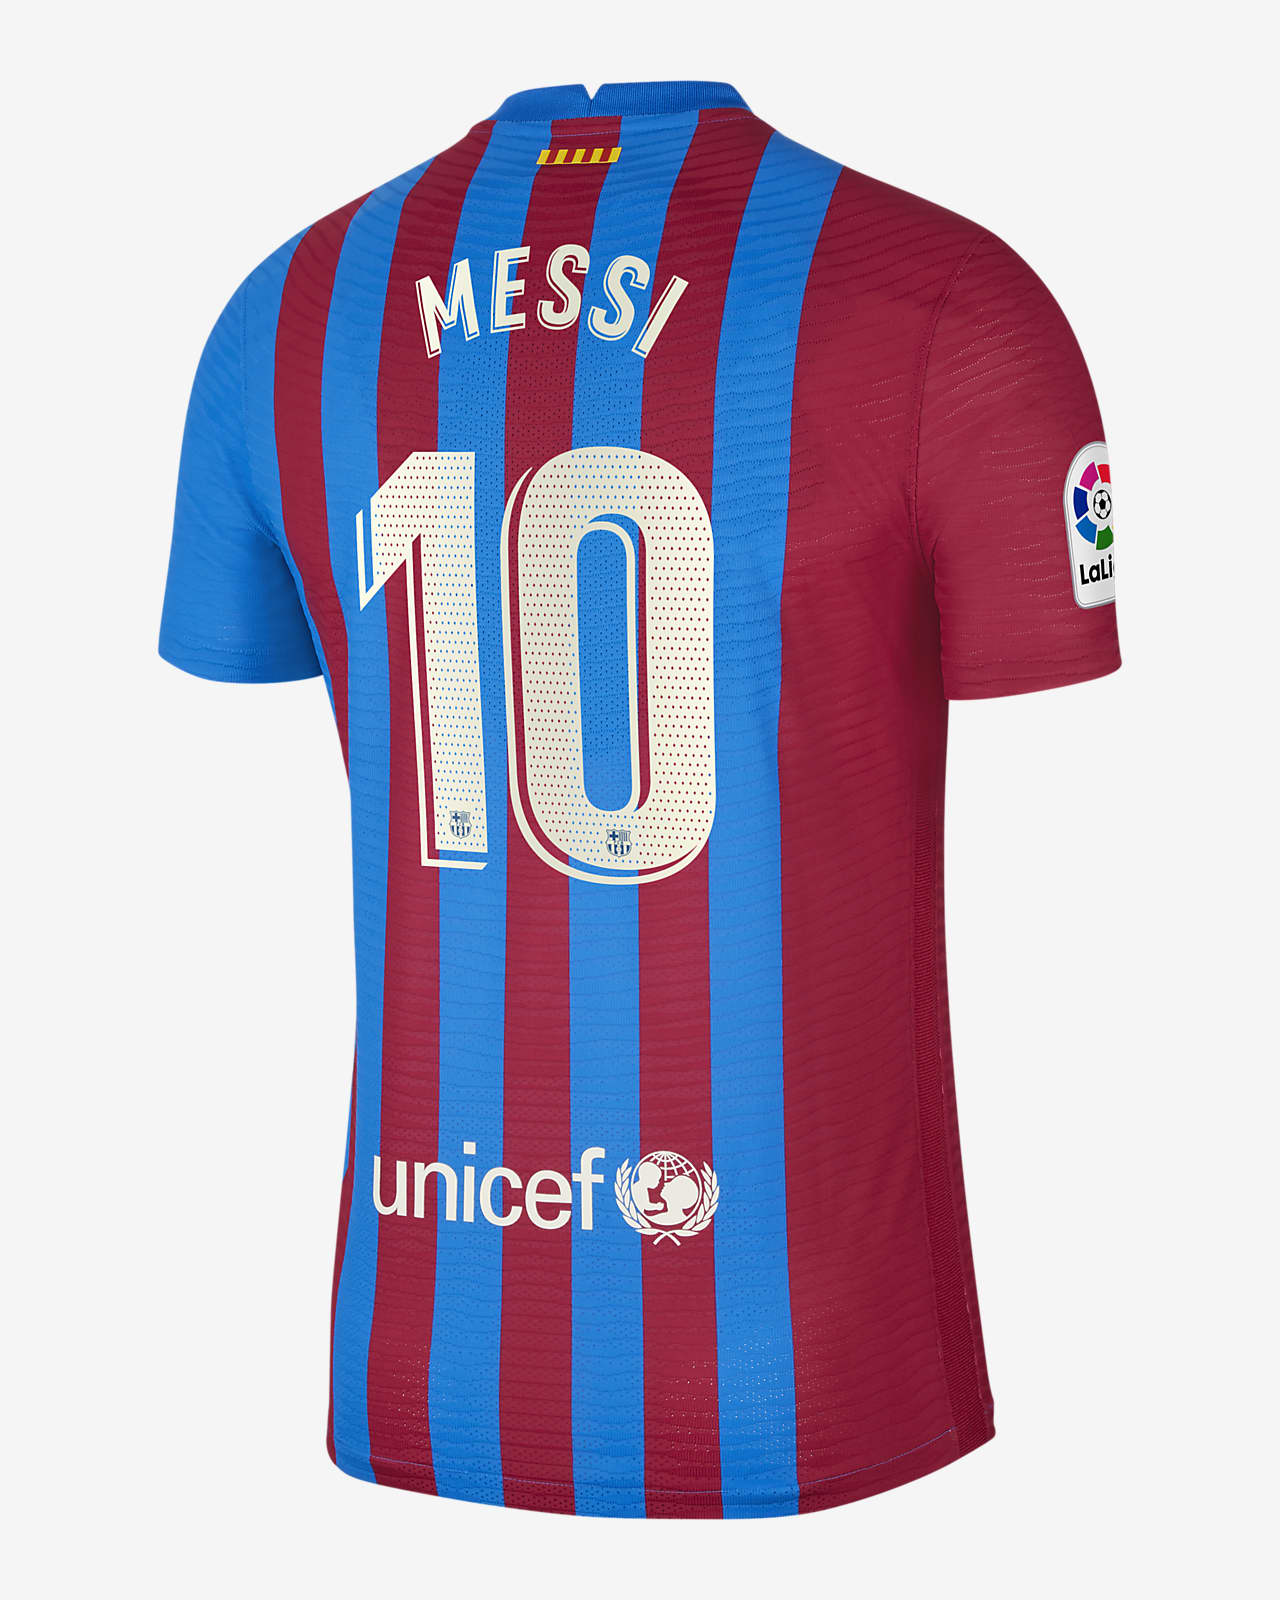 Release Assortment Profit blue messi jersey Hesitate stay license